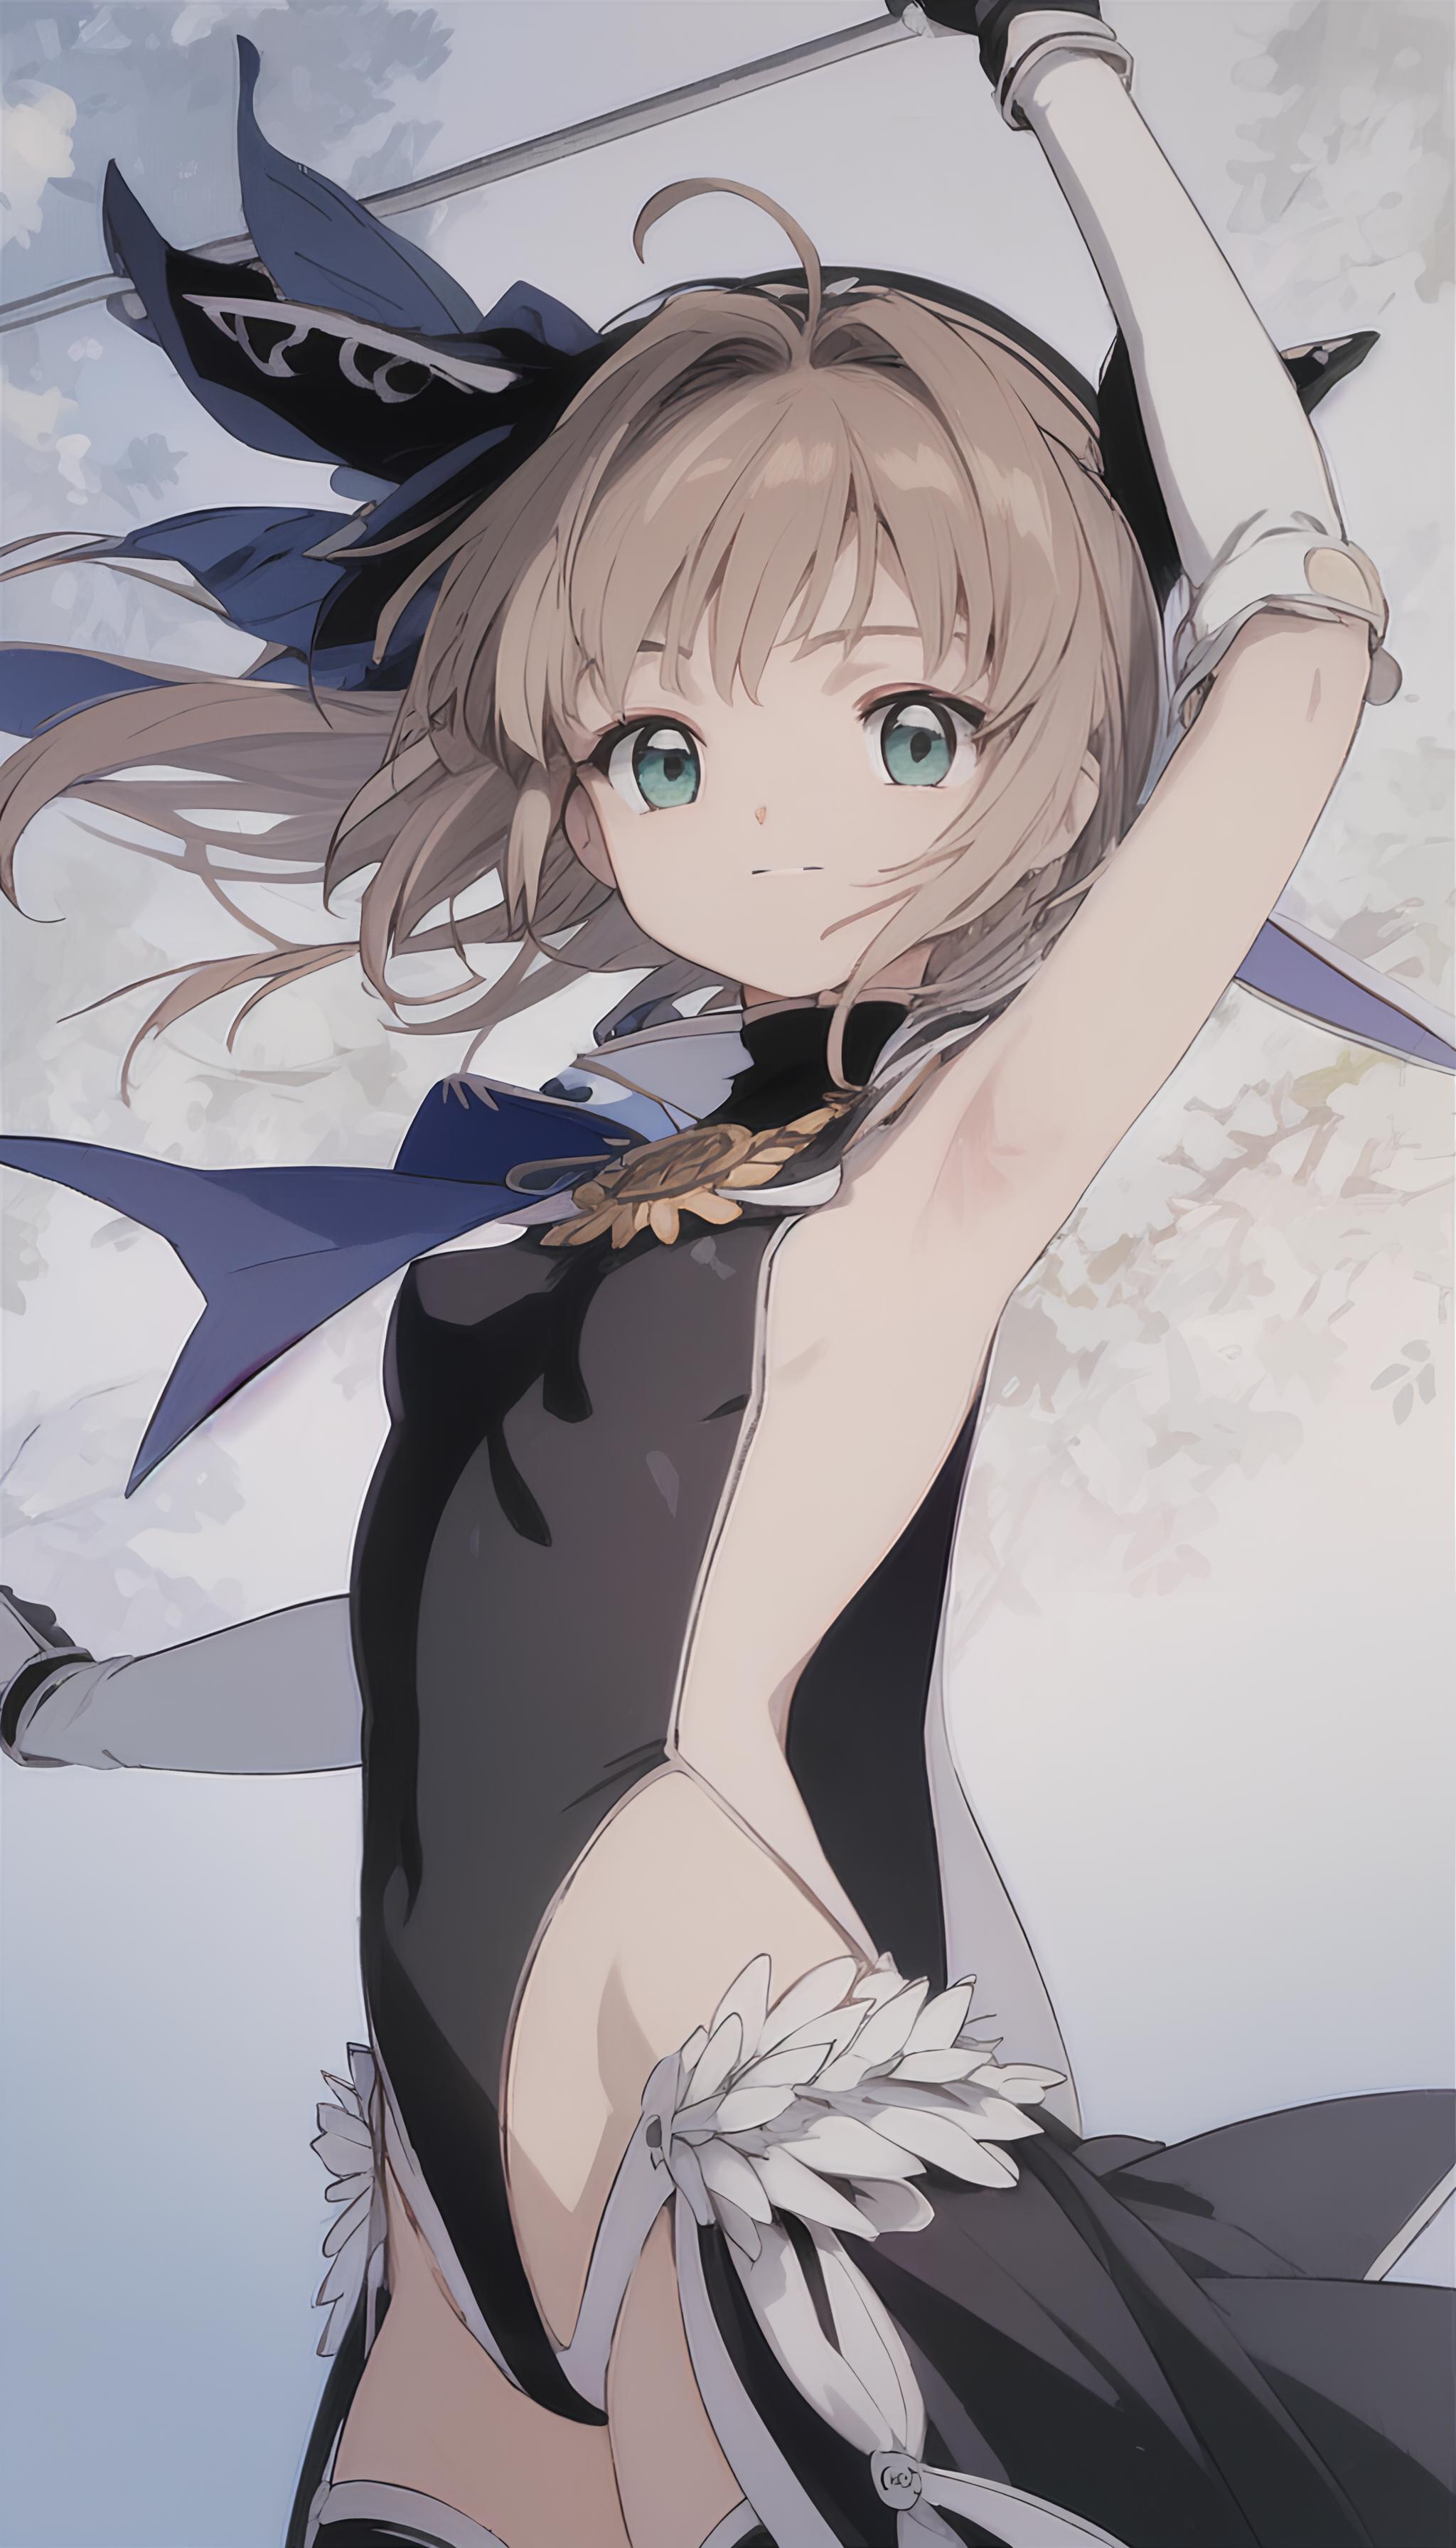 Anime character wearing a blue scarf and black dress.